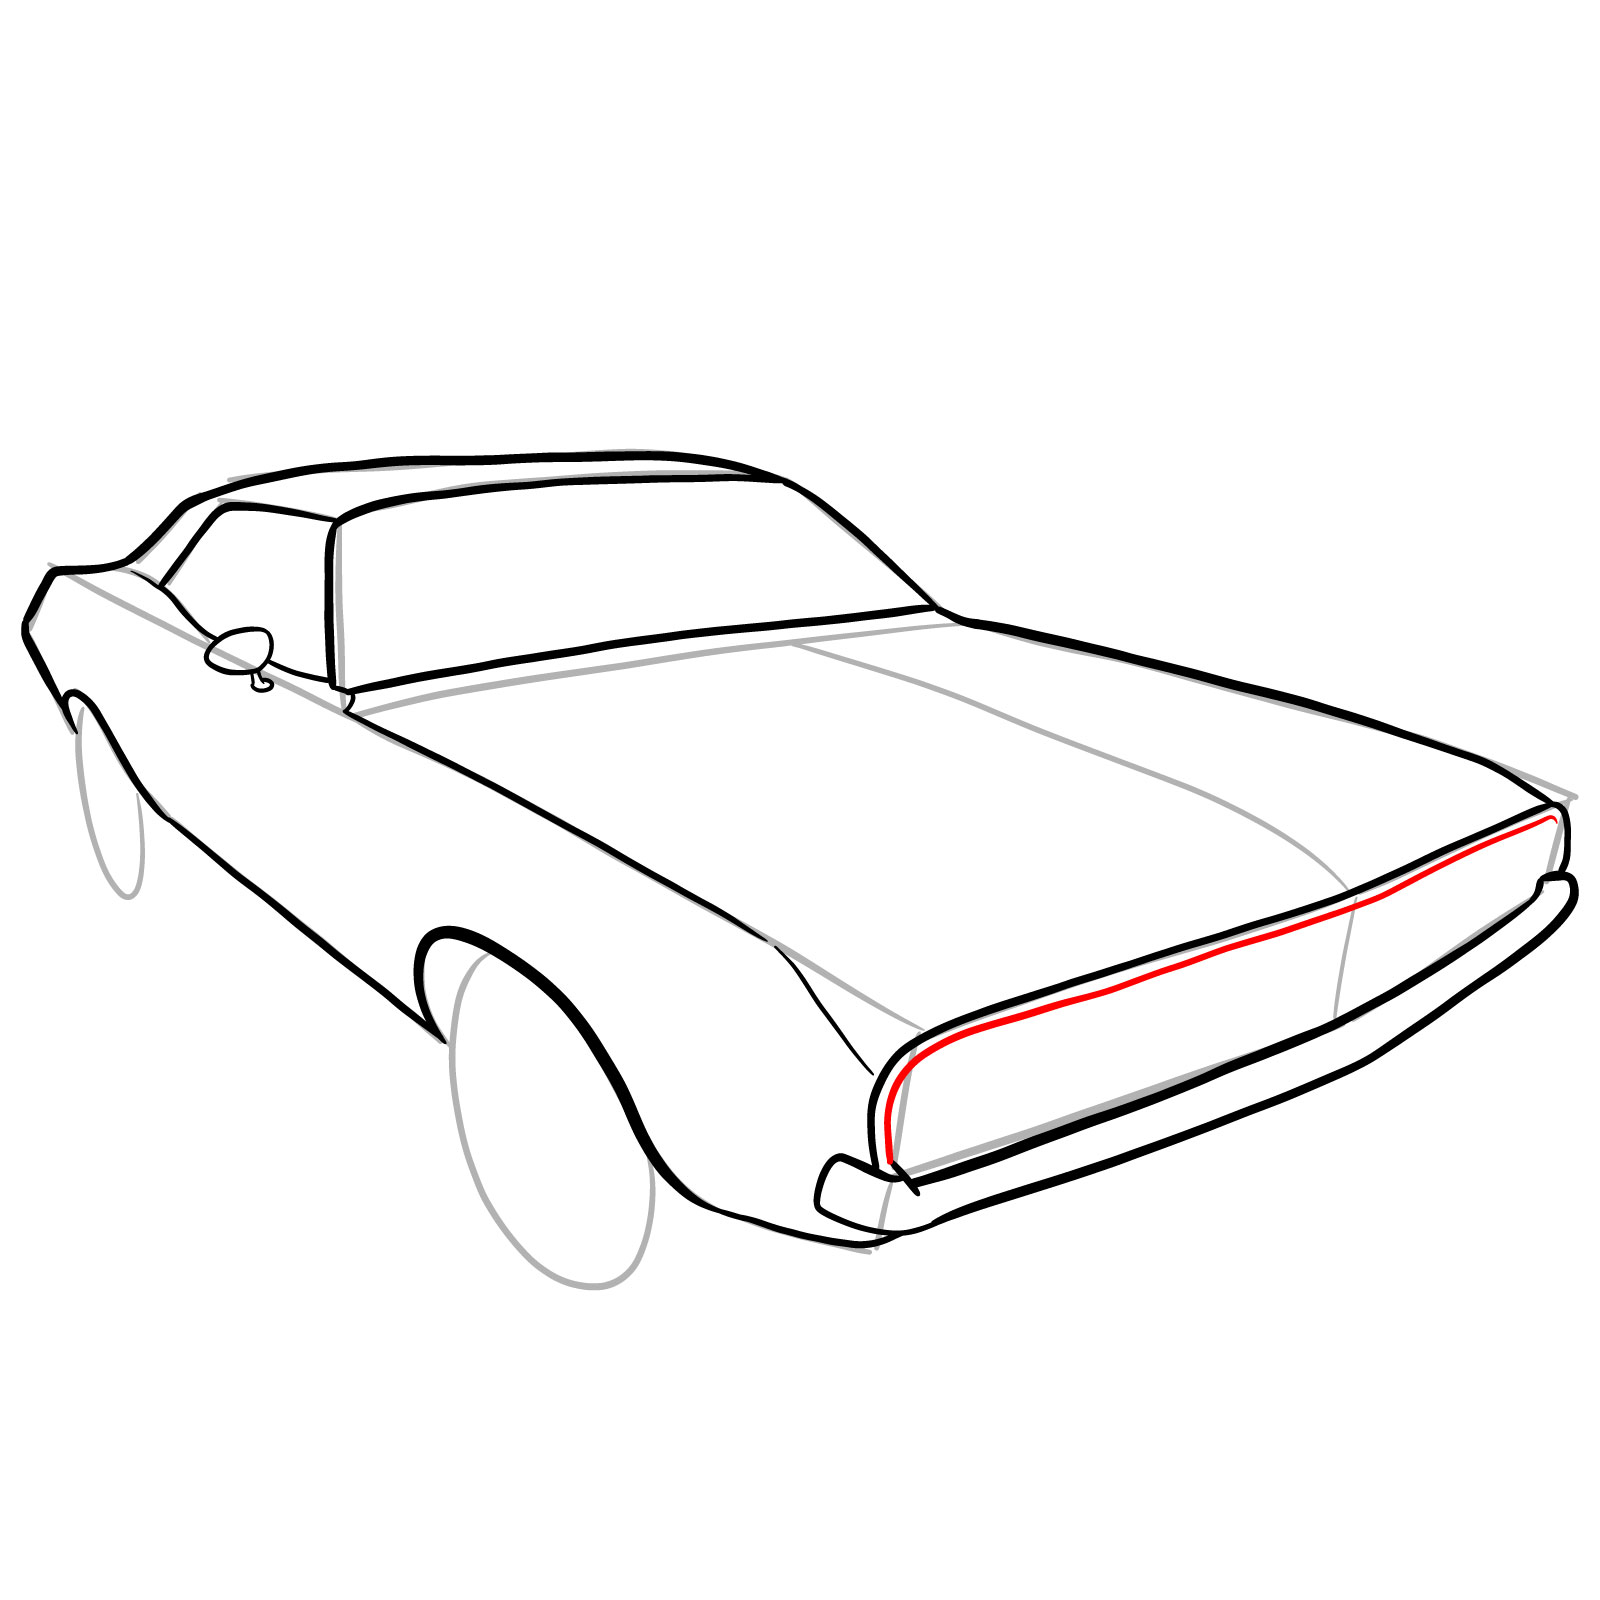 How to draw Dodge Challenger 1970 - step 17